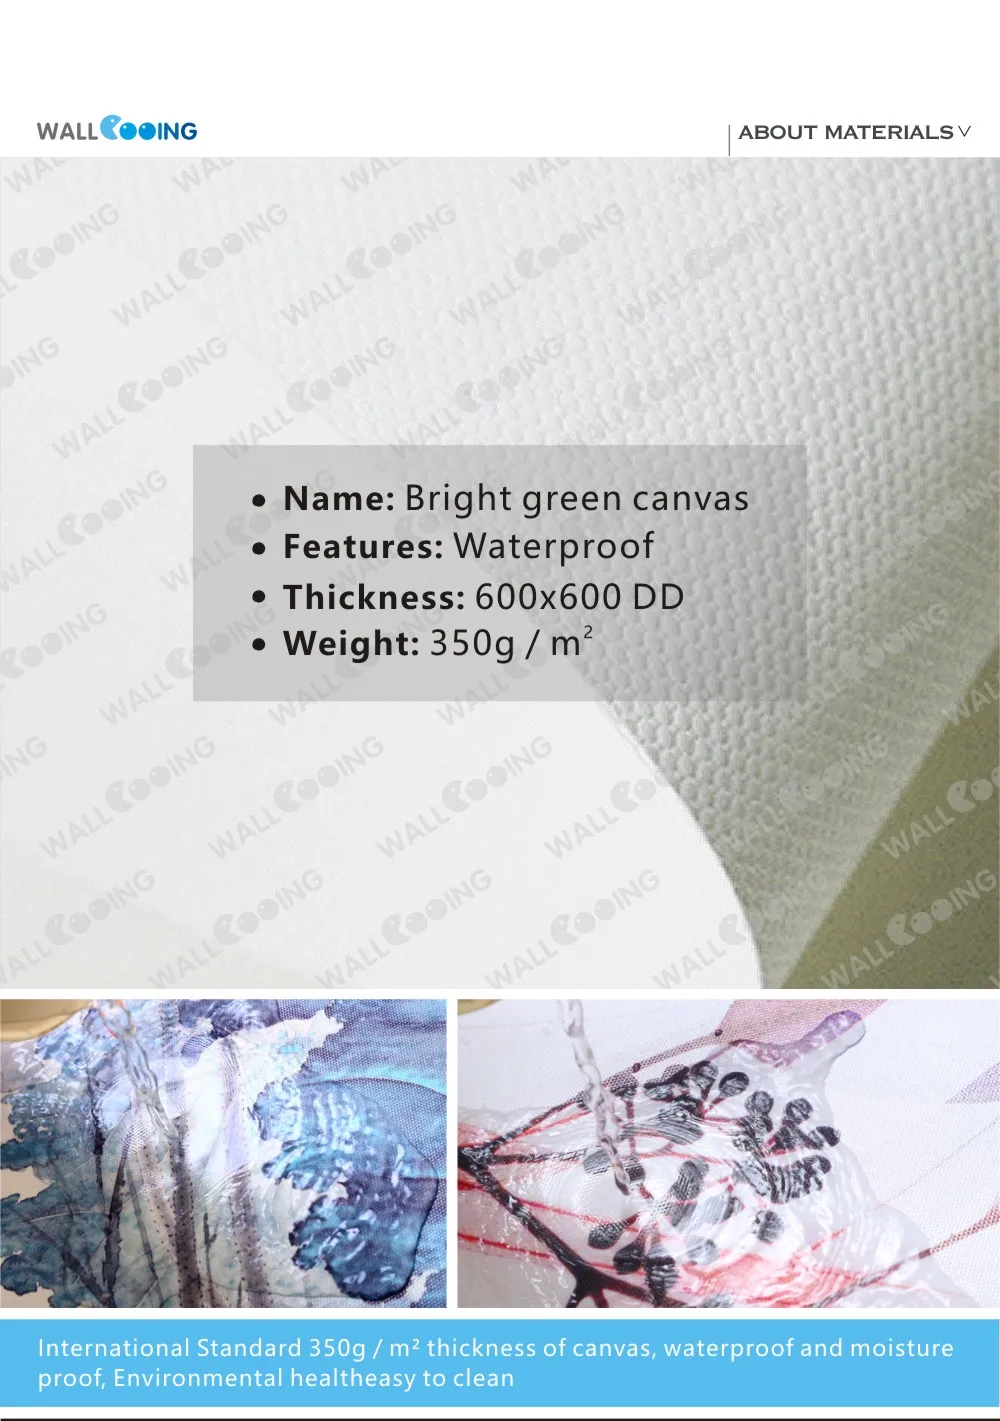 4-1 Waterproof canvas and material description